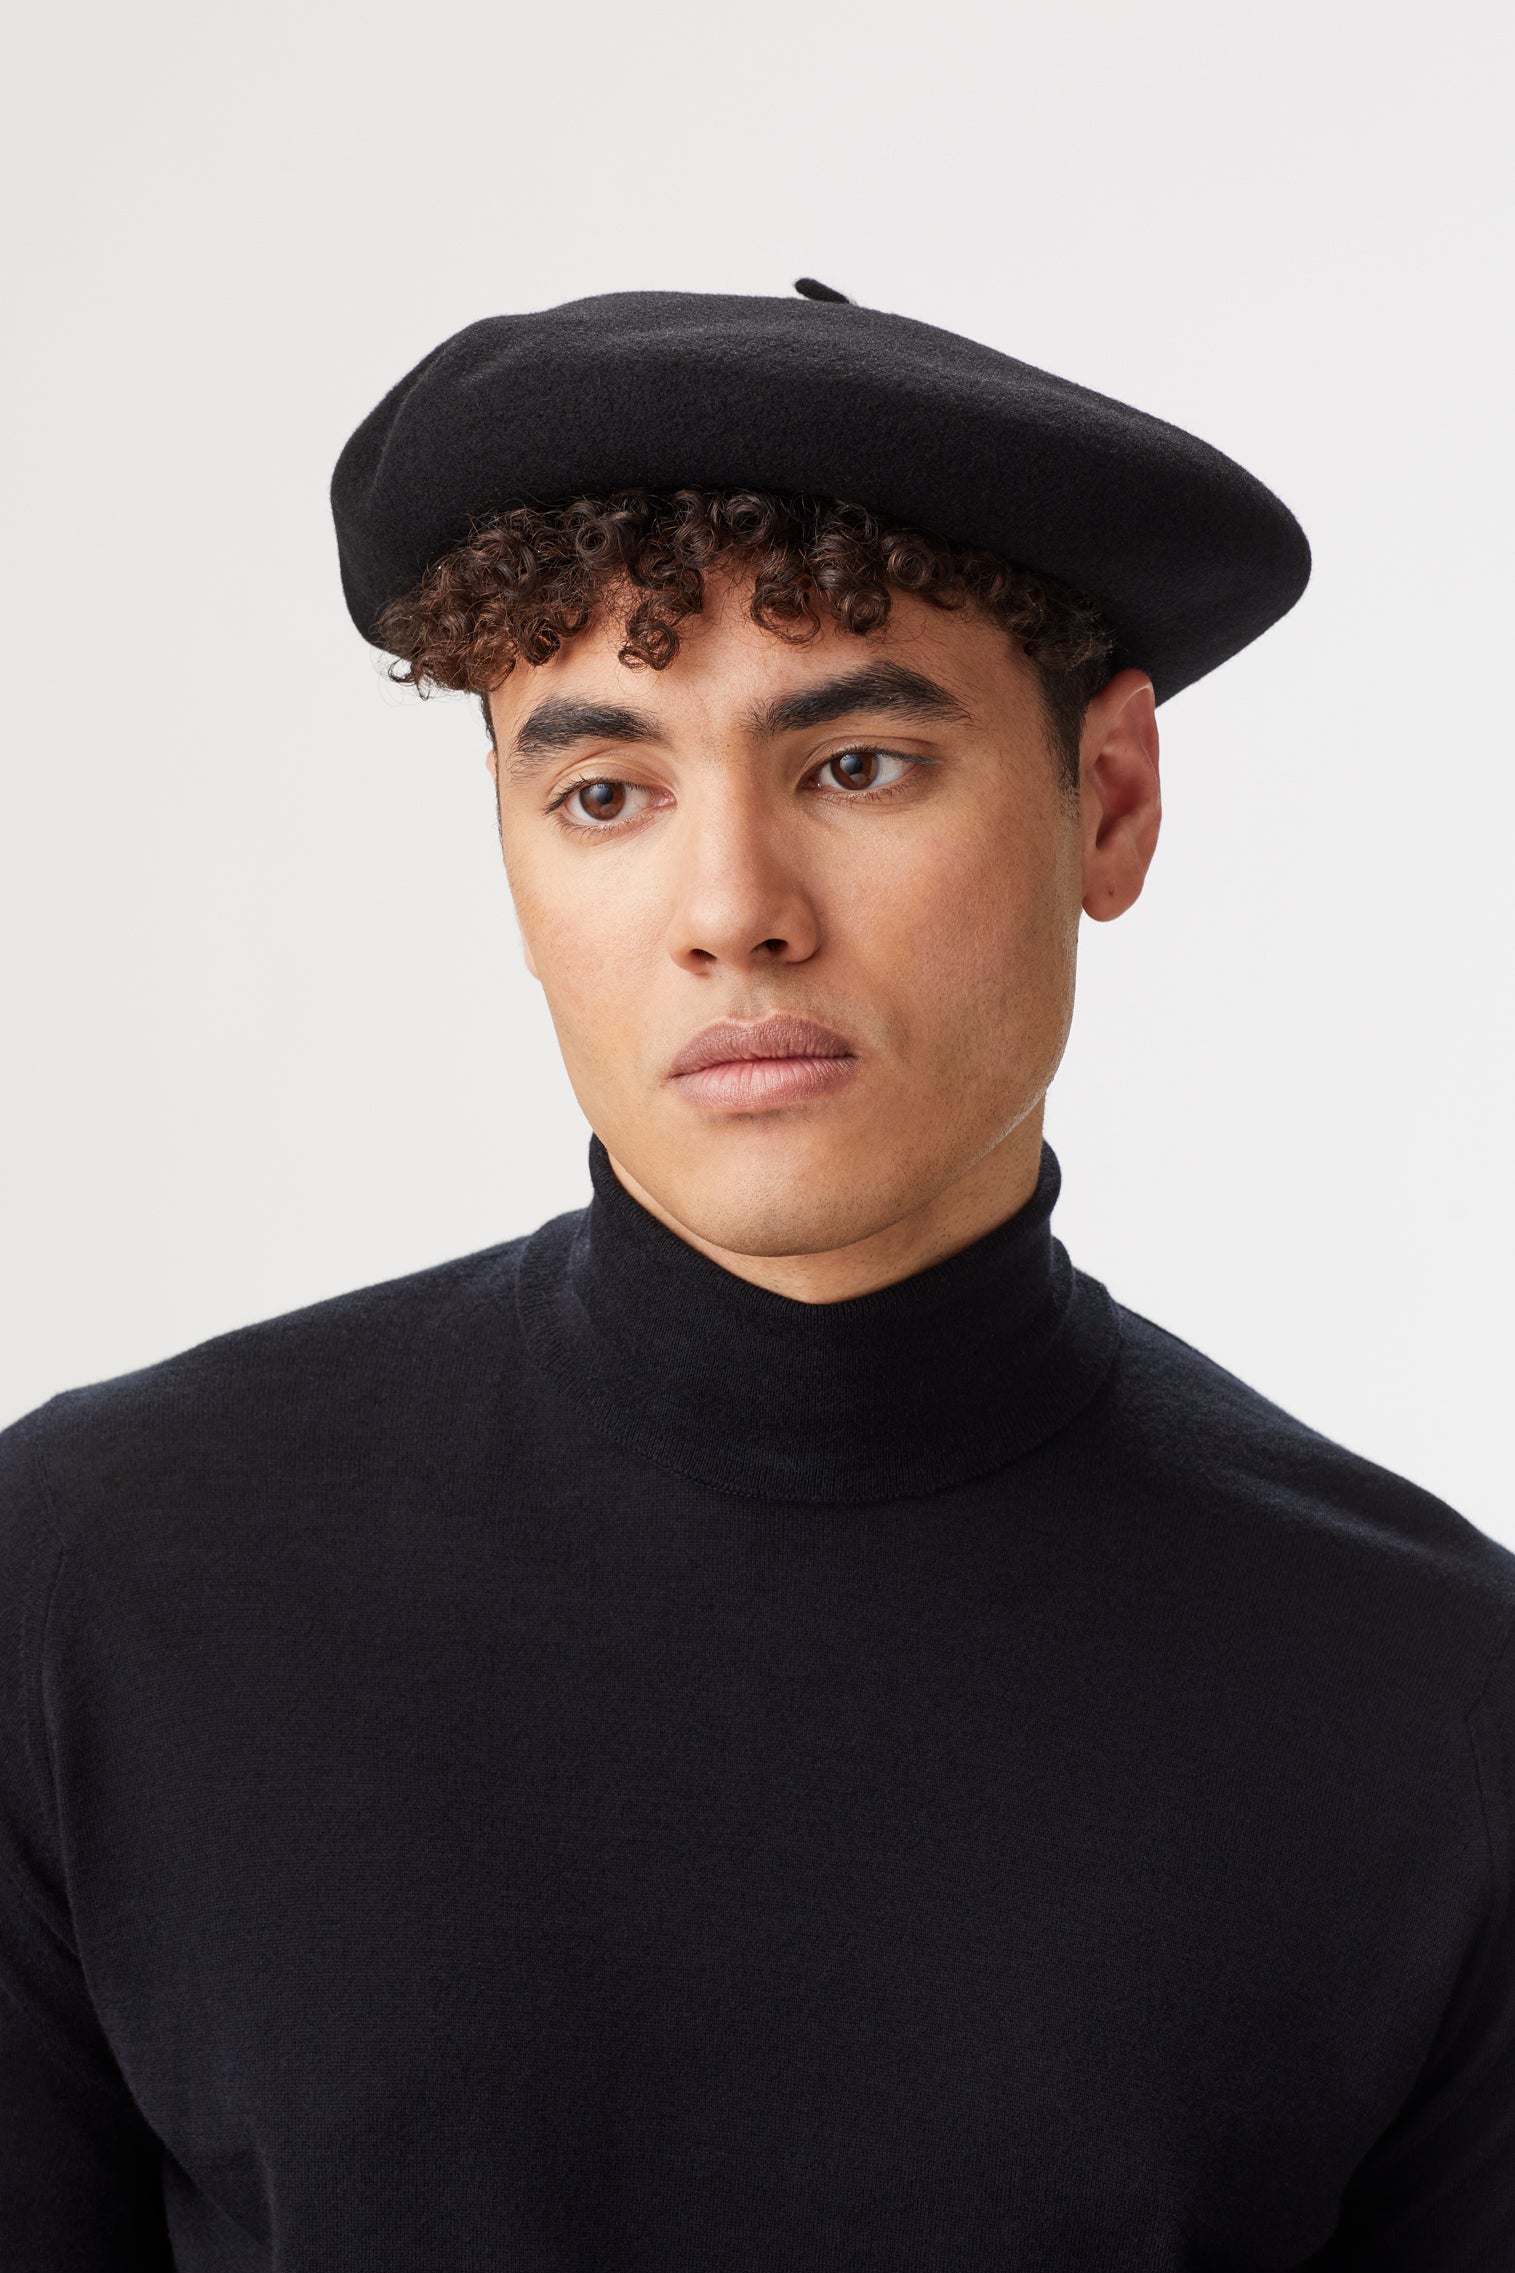 Basque Beret - Hats for Heart-shaped Face Shapes - Lock & Co. Hatters London UK